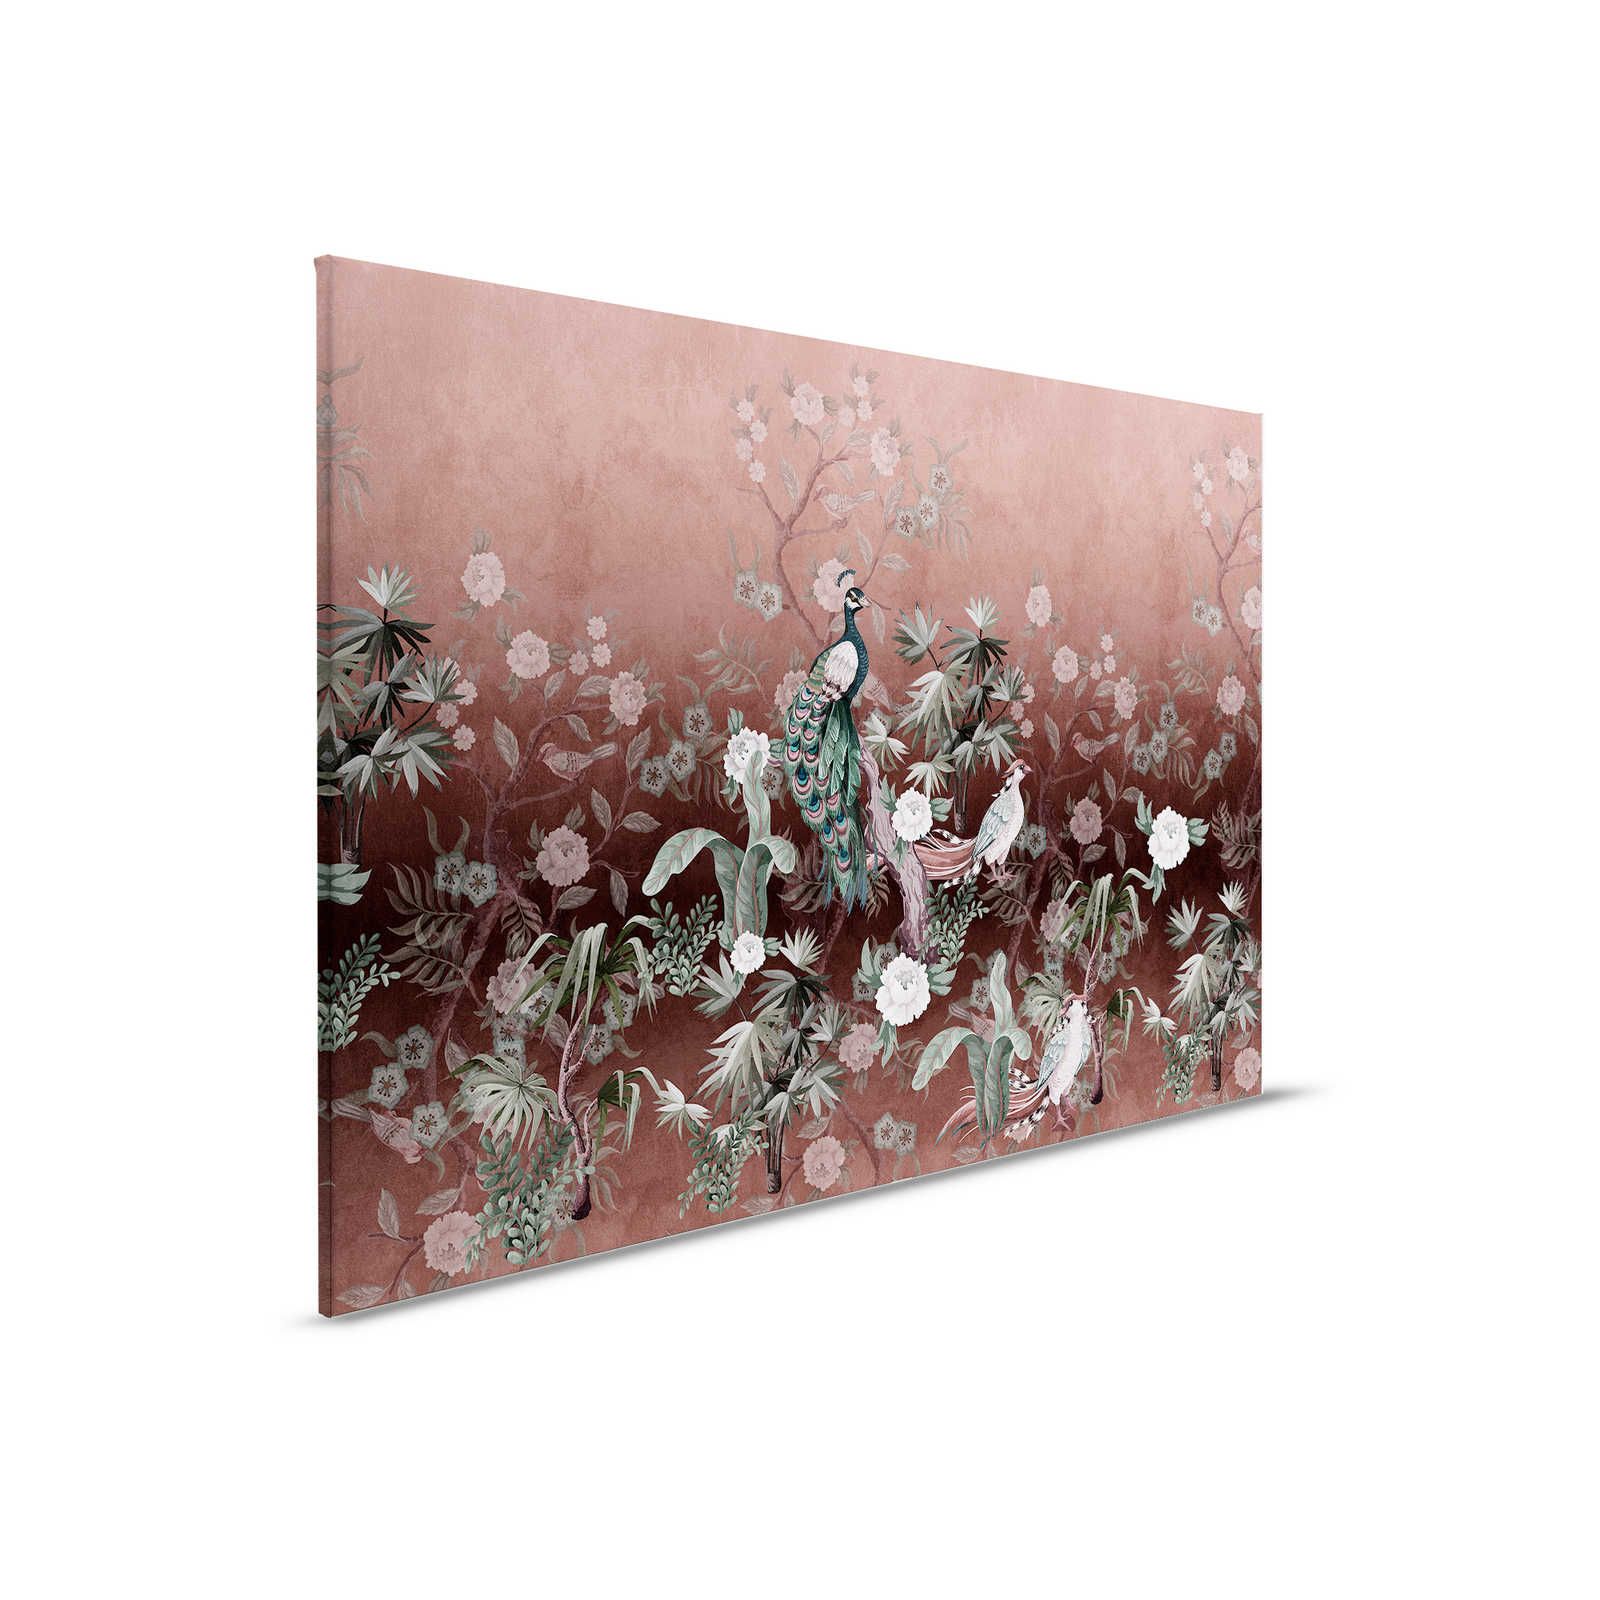 Peacock Island 1 - Canvas painting Peacock garden with flowers in old rose - 0,90 m x 0,60 m
